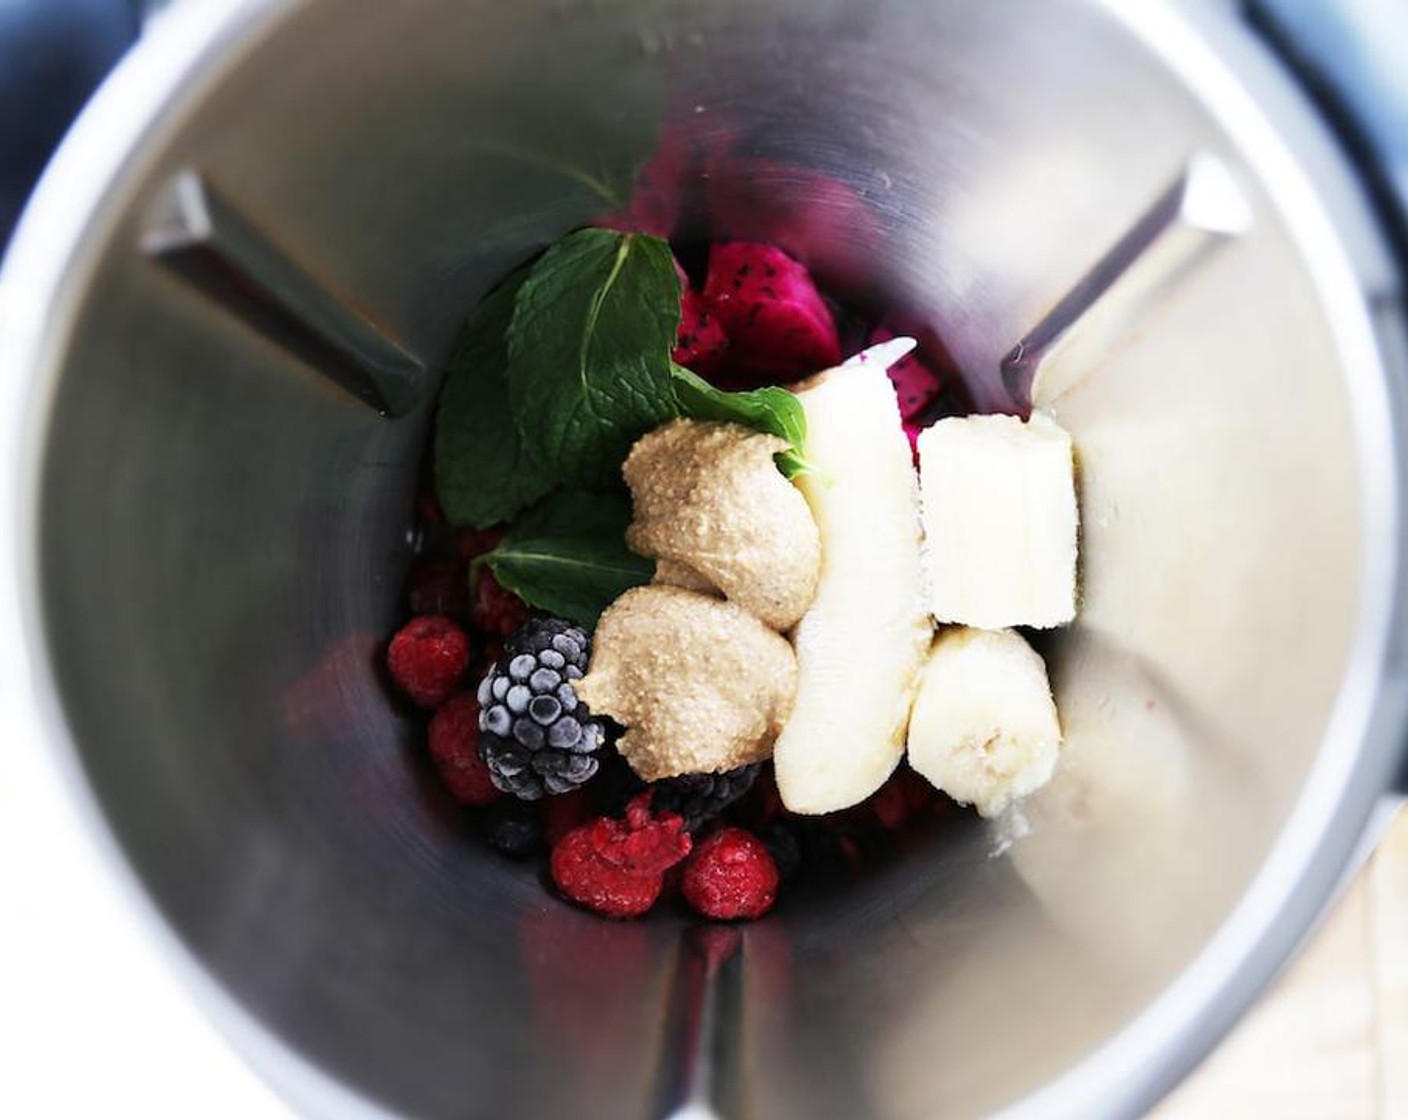 step 3 Add the Frozen Mixed Berries (1/2 cup), Dragon Fruit (3/4 cup), Banana (1 cup), Almond Butter (1 1/2 Tbsp), Coconut Chips (to taste), Fresh Mint Leaves (4), and Water (2 oz) into the blender and blend for 1 minute on Speed 7.